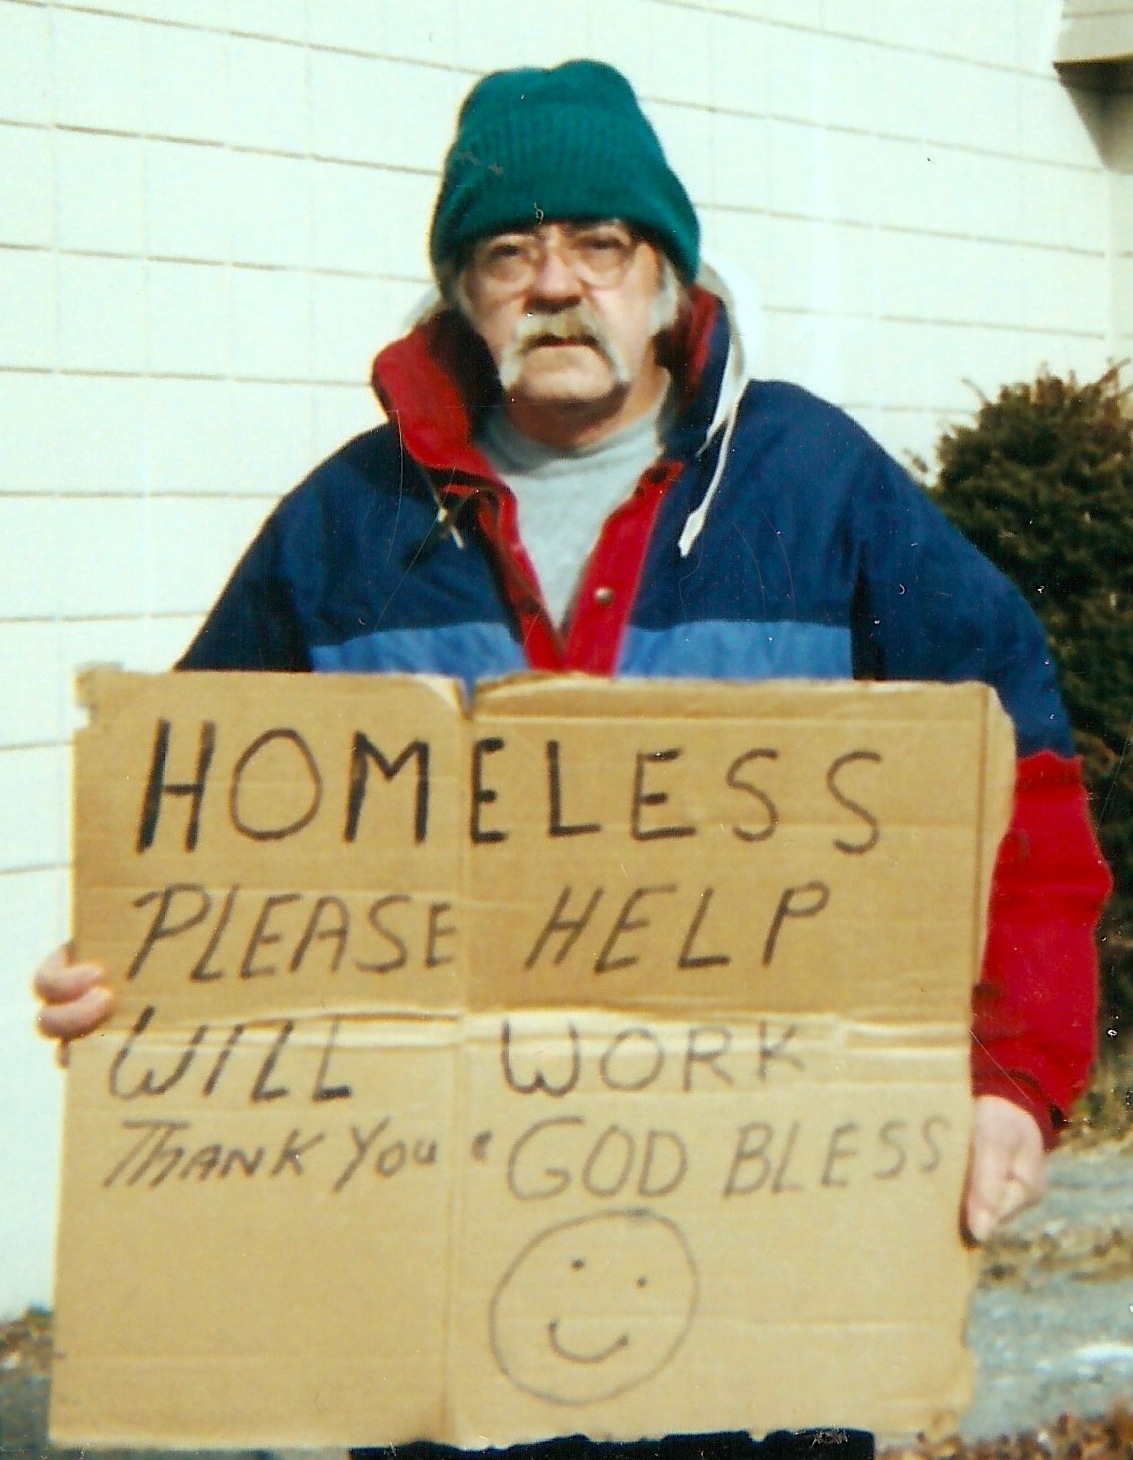 An older white man with a white mustache and glasses. He's wearing a green hat and blue and red jacket. He's holding a sign that reads, 'Homeless, please help. Will work. Thank you & God Bless'